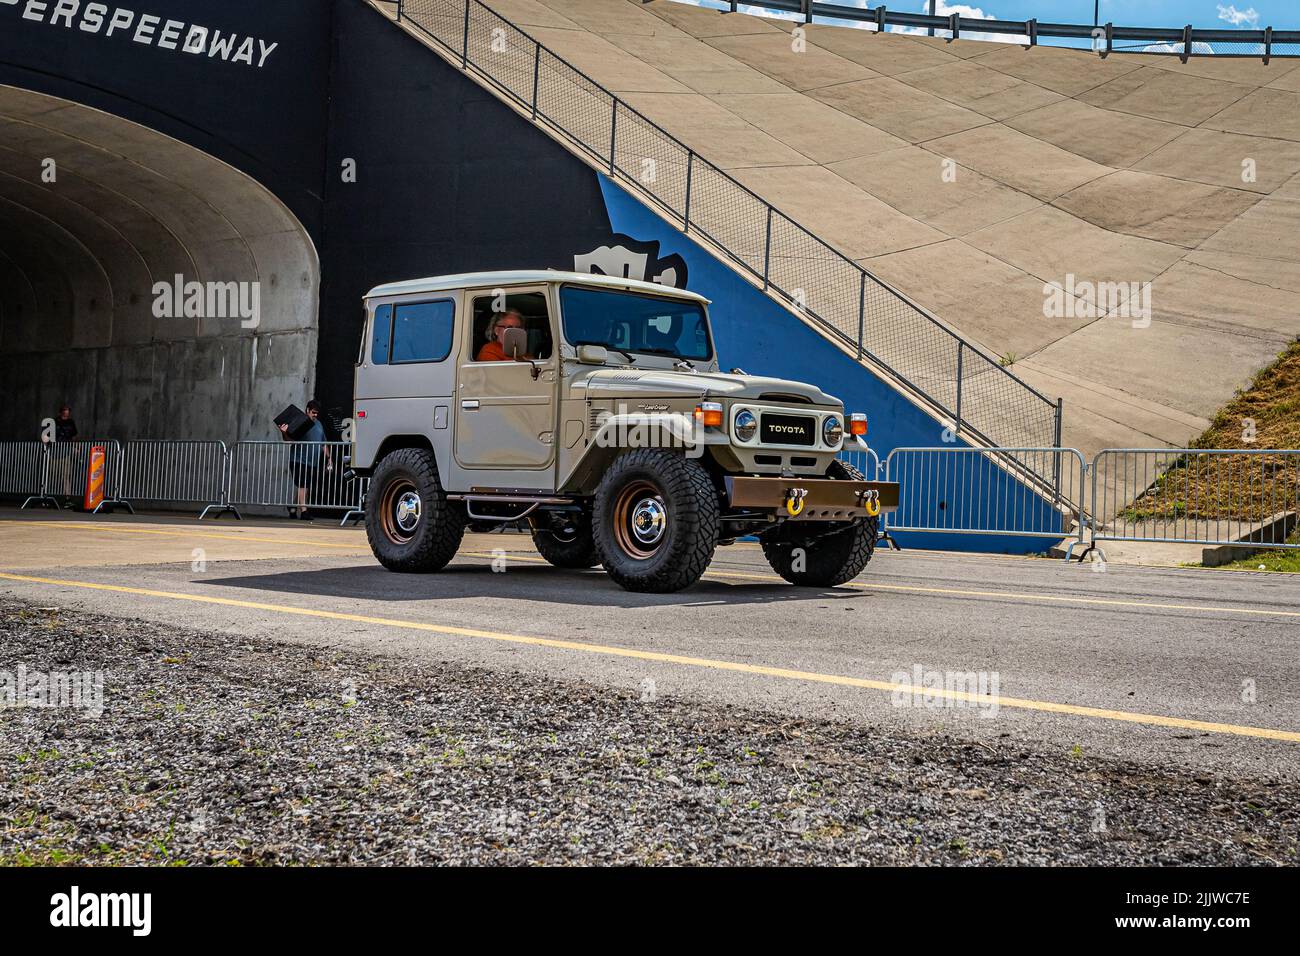 Lebanon, TN - May 14, 2022: Wide angle front corner view of a 1978 Toyota Land Cruiser FJ40 Truck at a local car show. Stock Photo